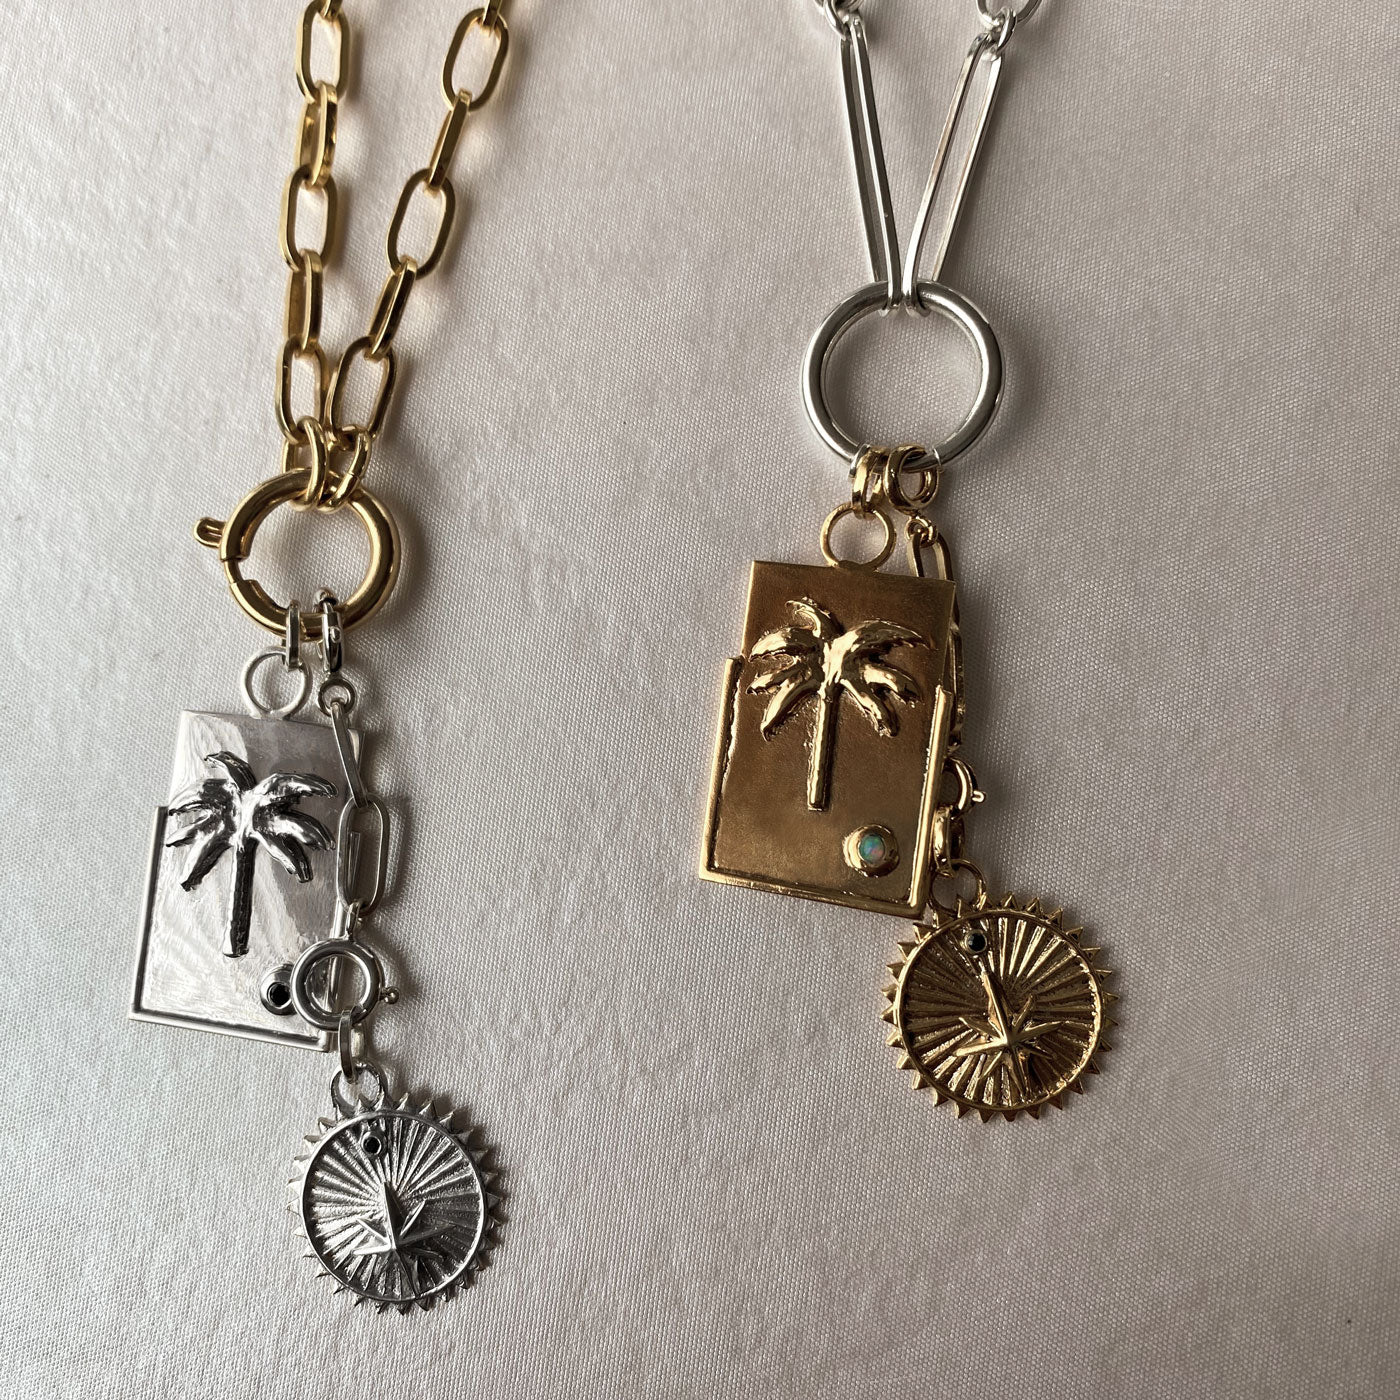 stacking charms and medallions sterling silver and gold chains